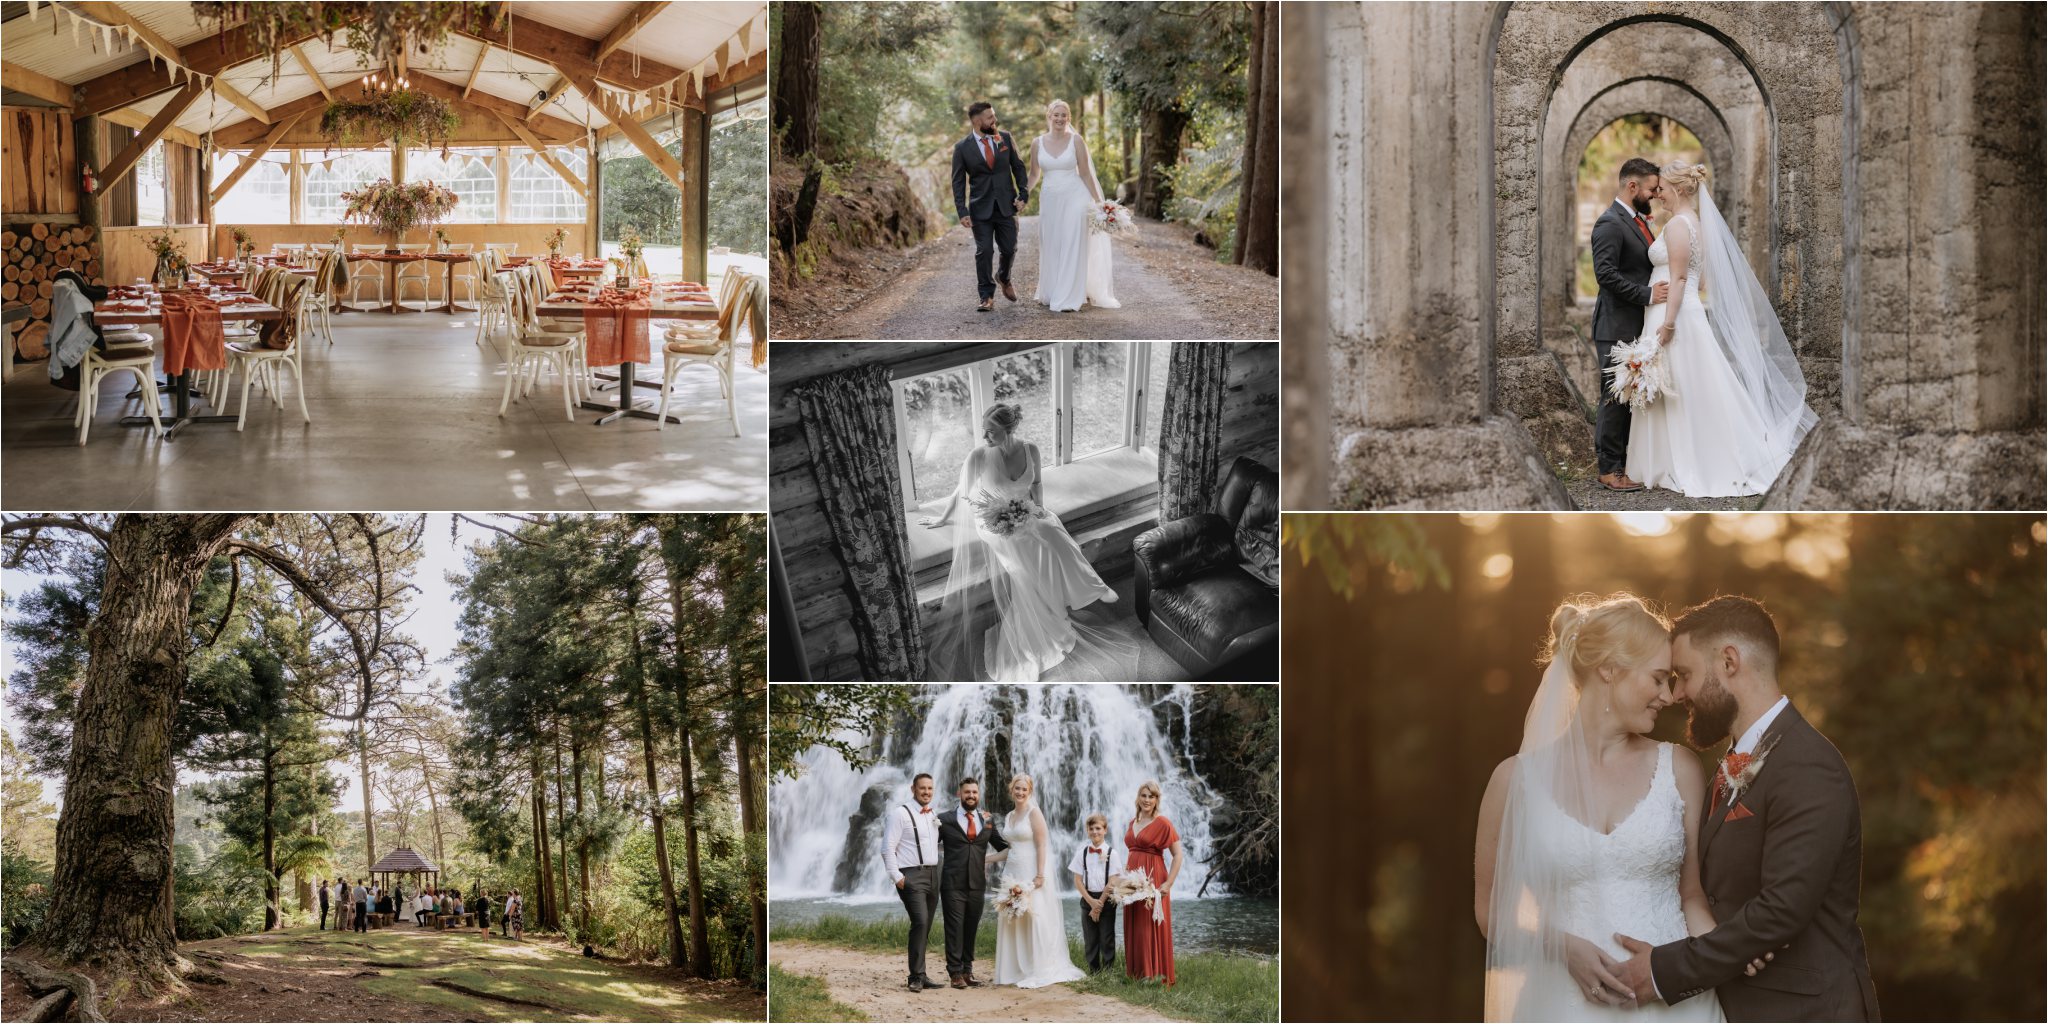 images at waterfall driveway and wedding ceremony Falls retreat